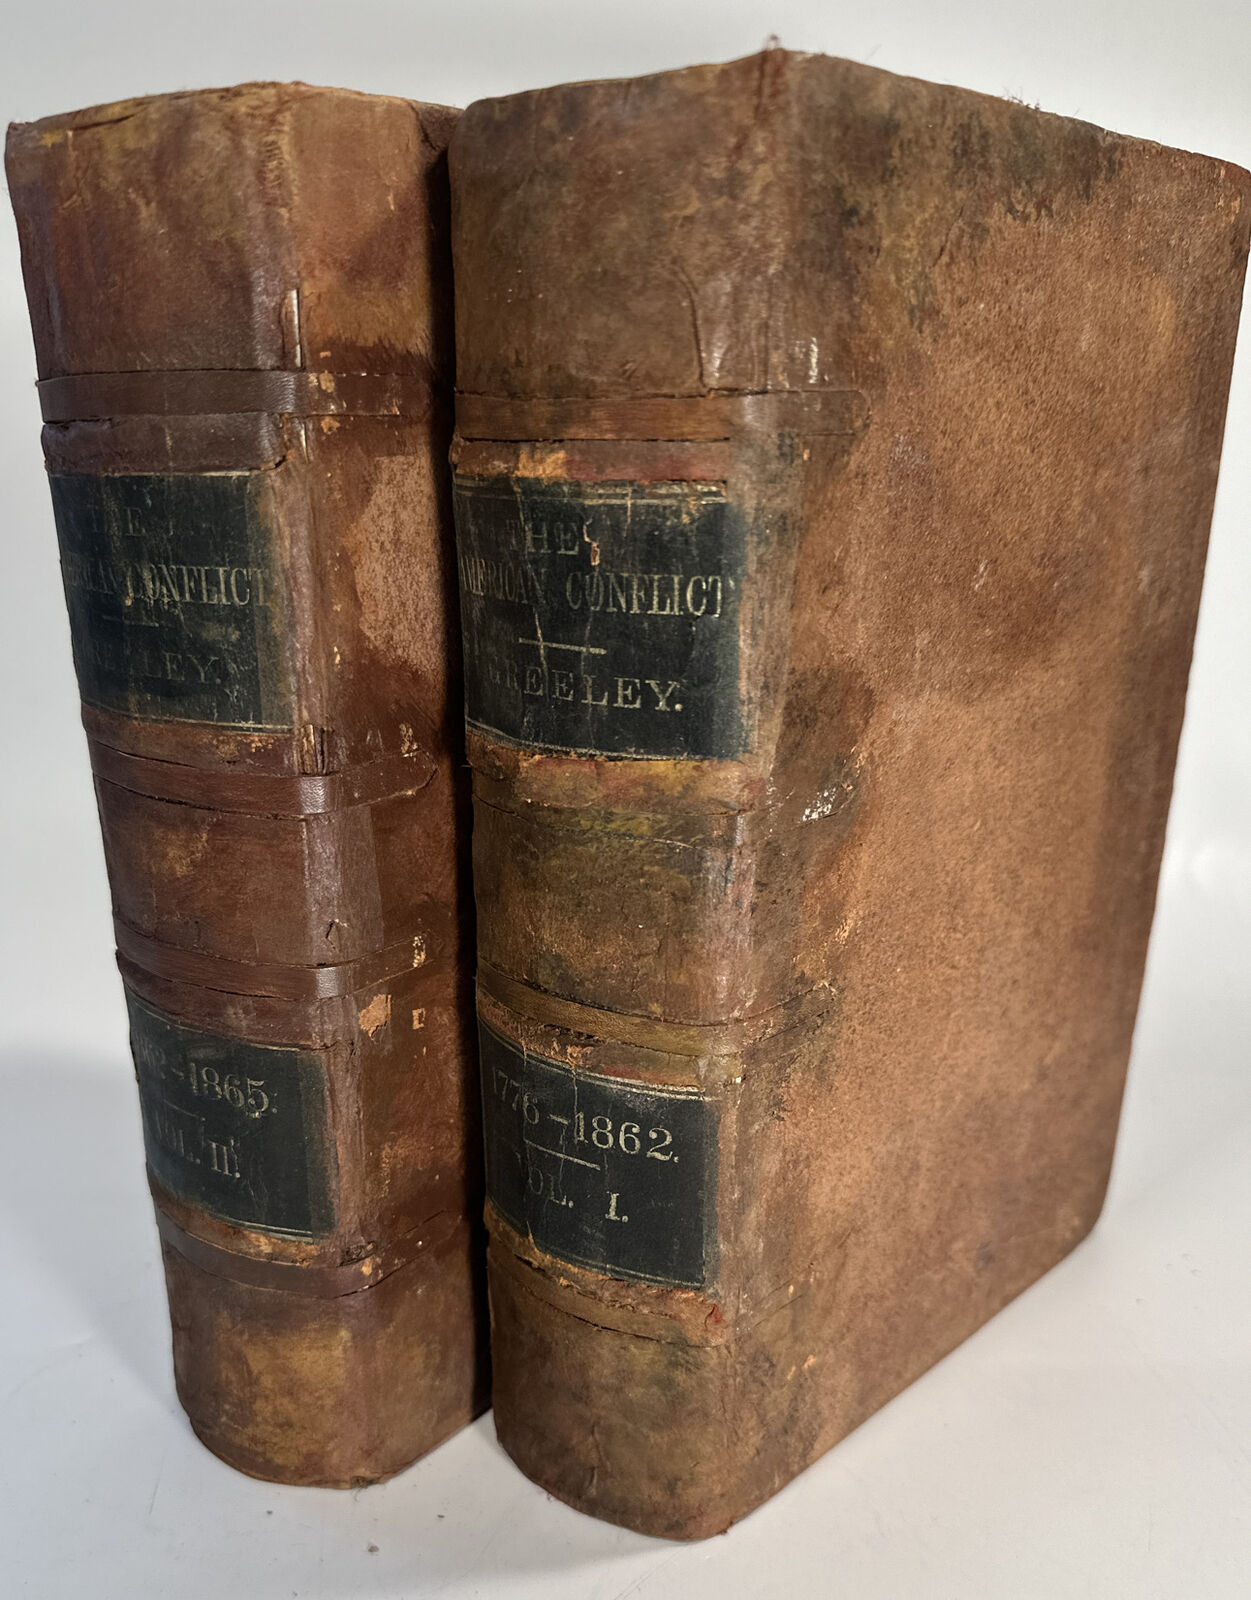 The American conflict by Greeley 1866 two volumes